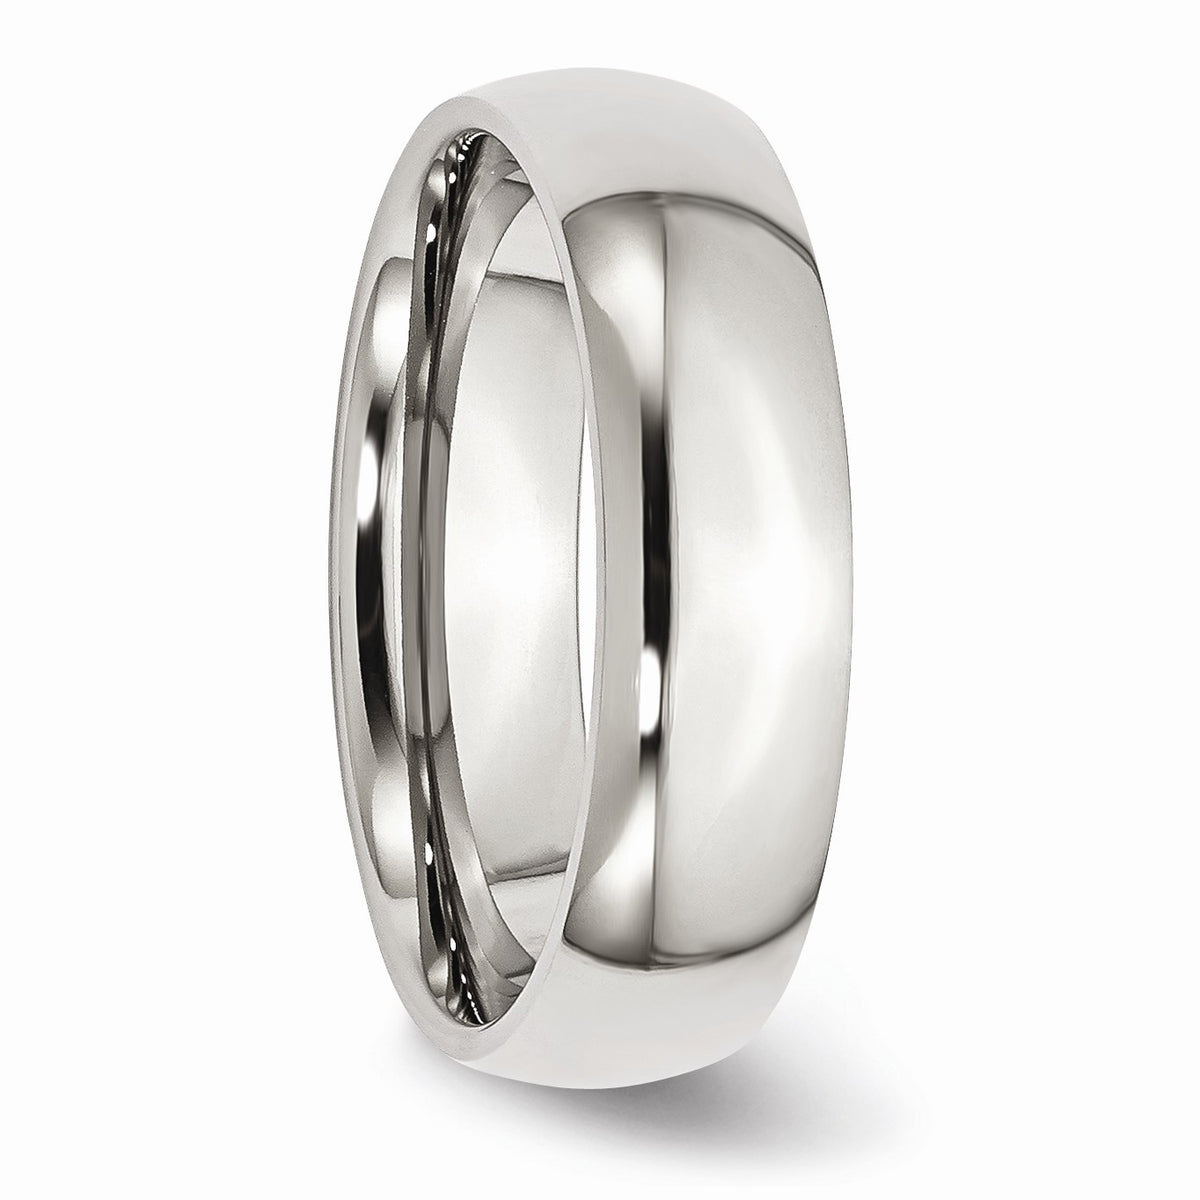 Alternate view of the Stainless Steel Domed 6mm Polished Comfort Fit Band by The Black Bow Jewelry Co.